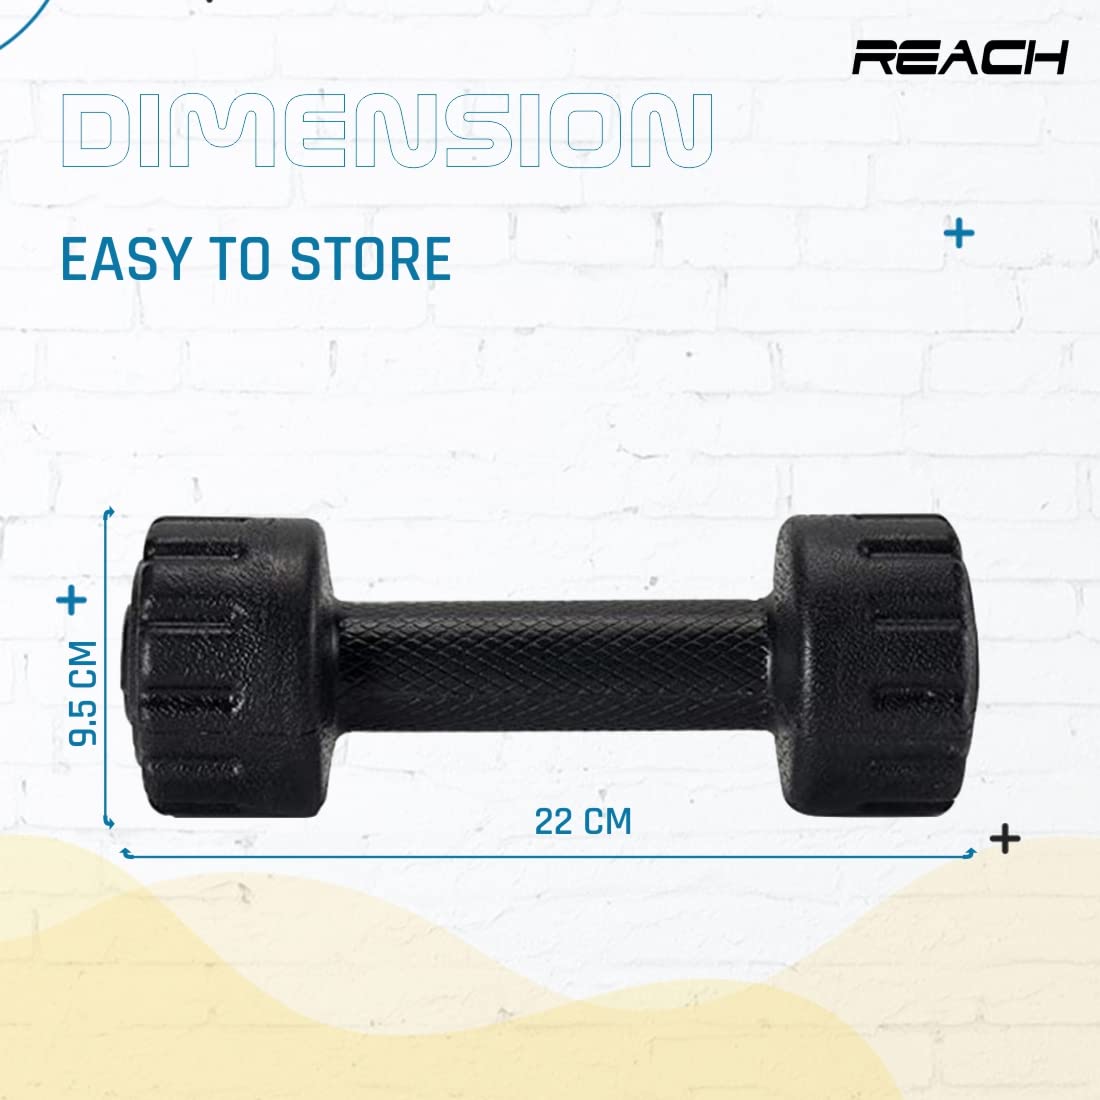 Reach PVC Dumbbell Set Weights| Pack of 2 For Strength Training Home Gym Fitness & Full Body Workout | Easy Grip & Anti- slip Dumbbell for Weight loss (2kg, Black)